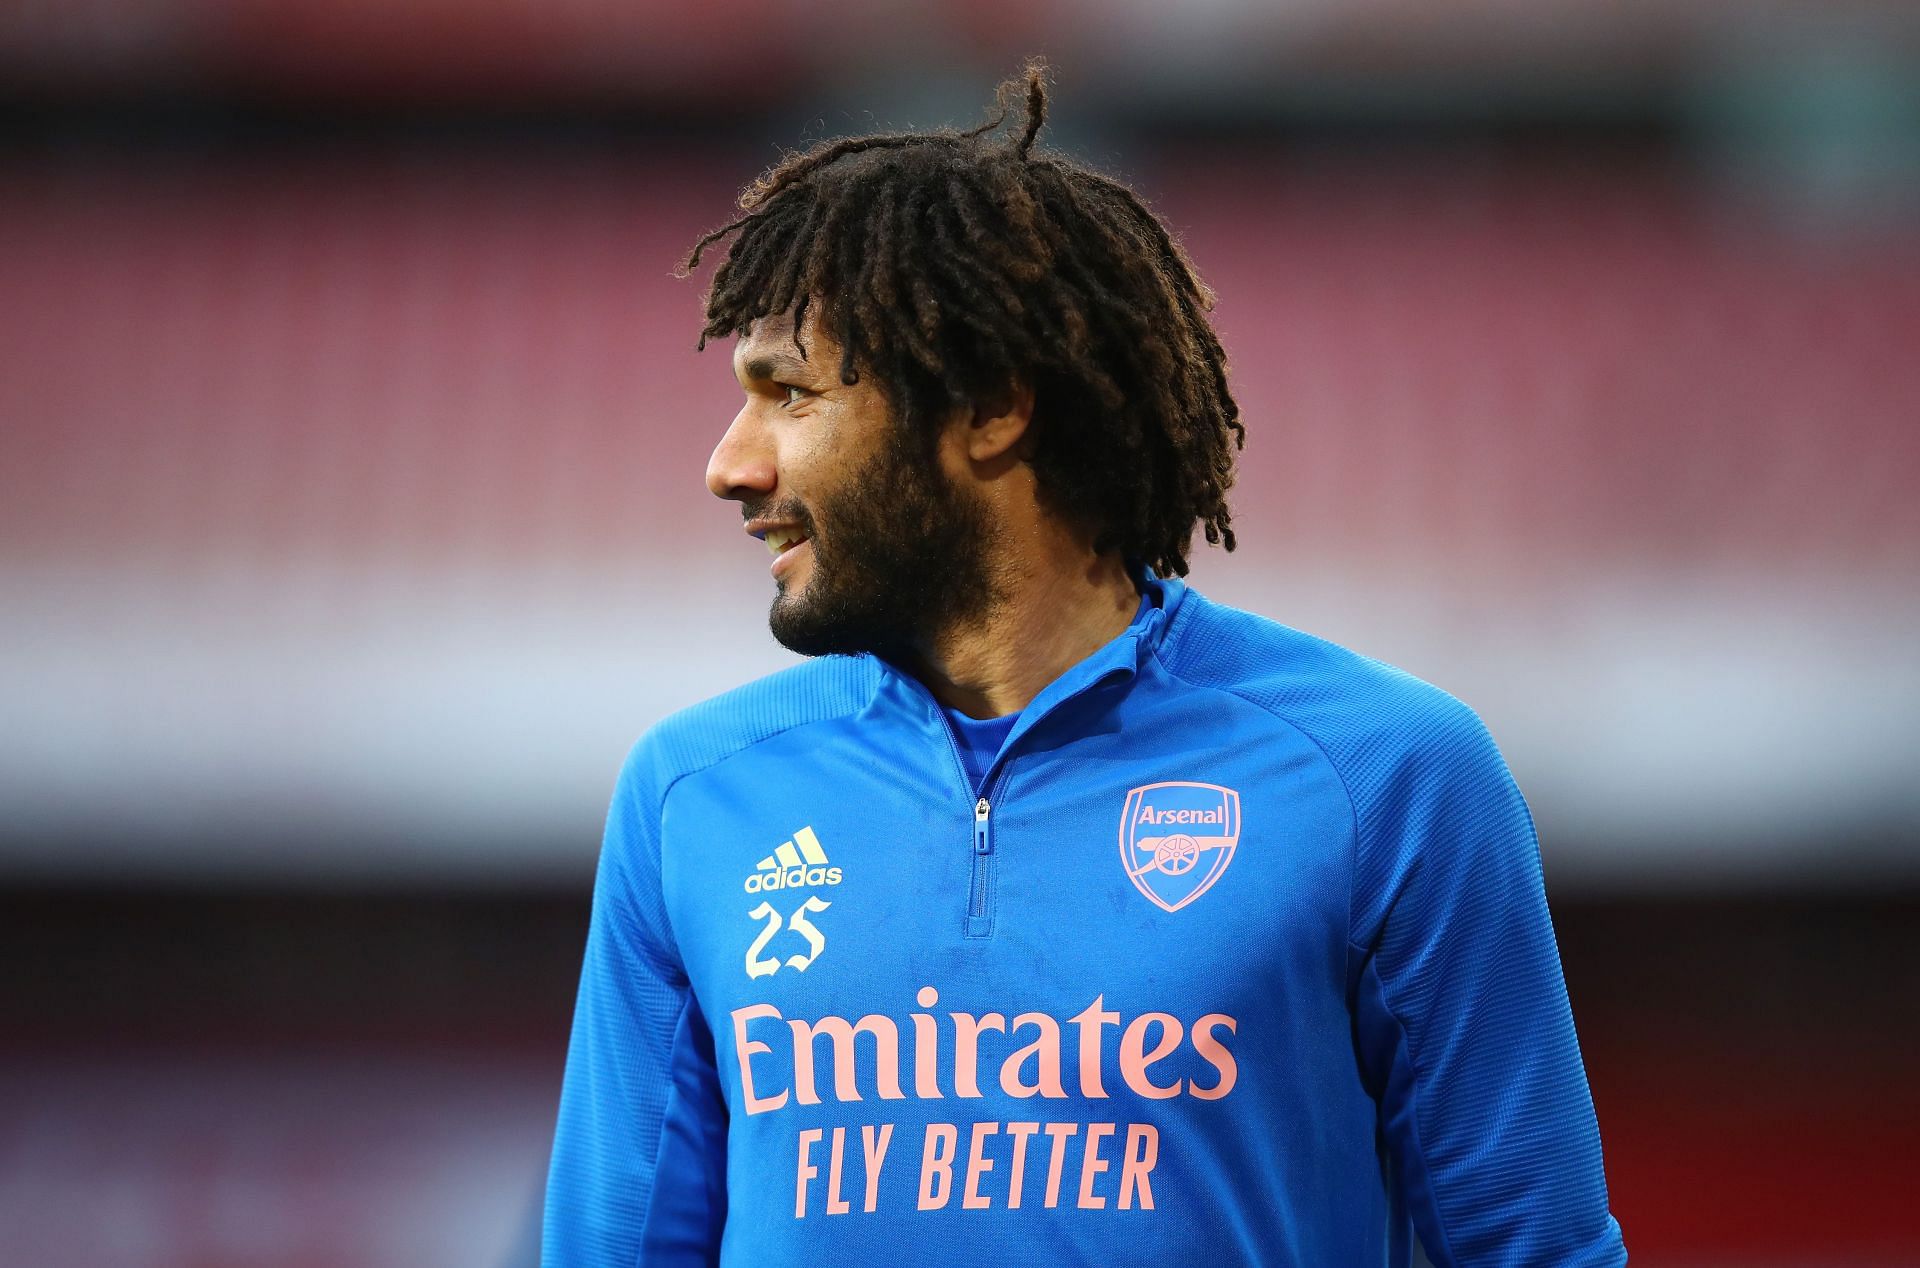 Galatasaray have initiated negotiations with Arsenal to sign Mohamed Elneny in January.